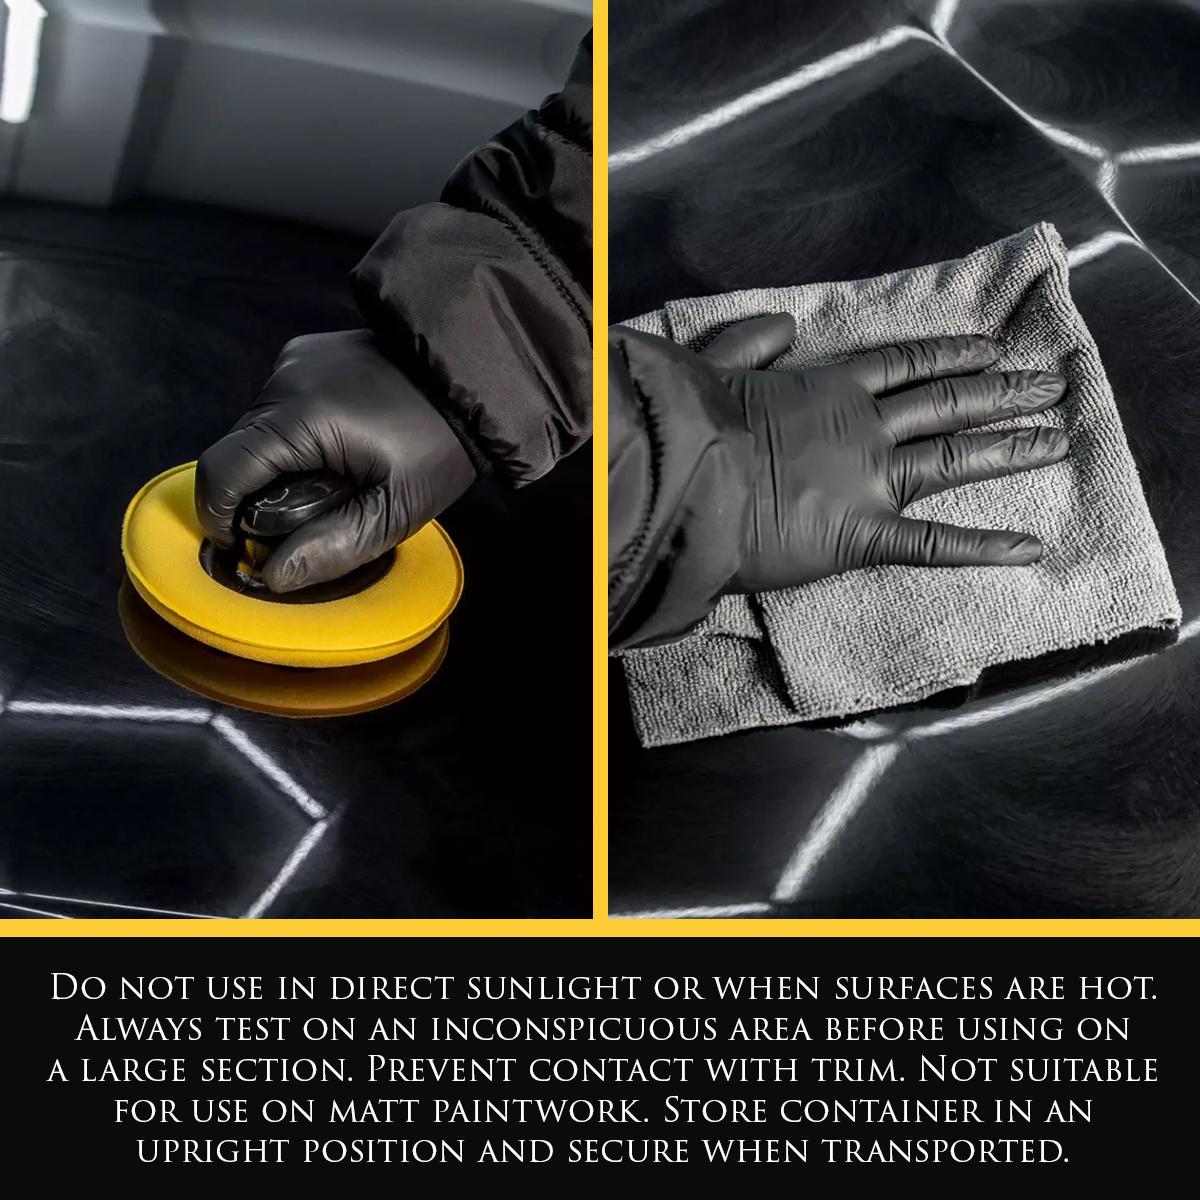 Left Image shows Diamond Black Wax being applied to a black vehicle with a yellow sponge applicator pad. Right Image shows Diamond Black Wax being buffed off a black vehicle with a grey microfibre cloth. Text: Do not use in direct sunlight or when surfaces are hot. Always test on an inconspicuous area before using on a large section. Prevent contact with trim. Not suitable for use on matt paintwork. Store container in an upright position and secure when transported.